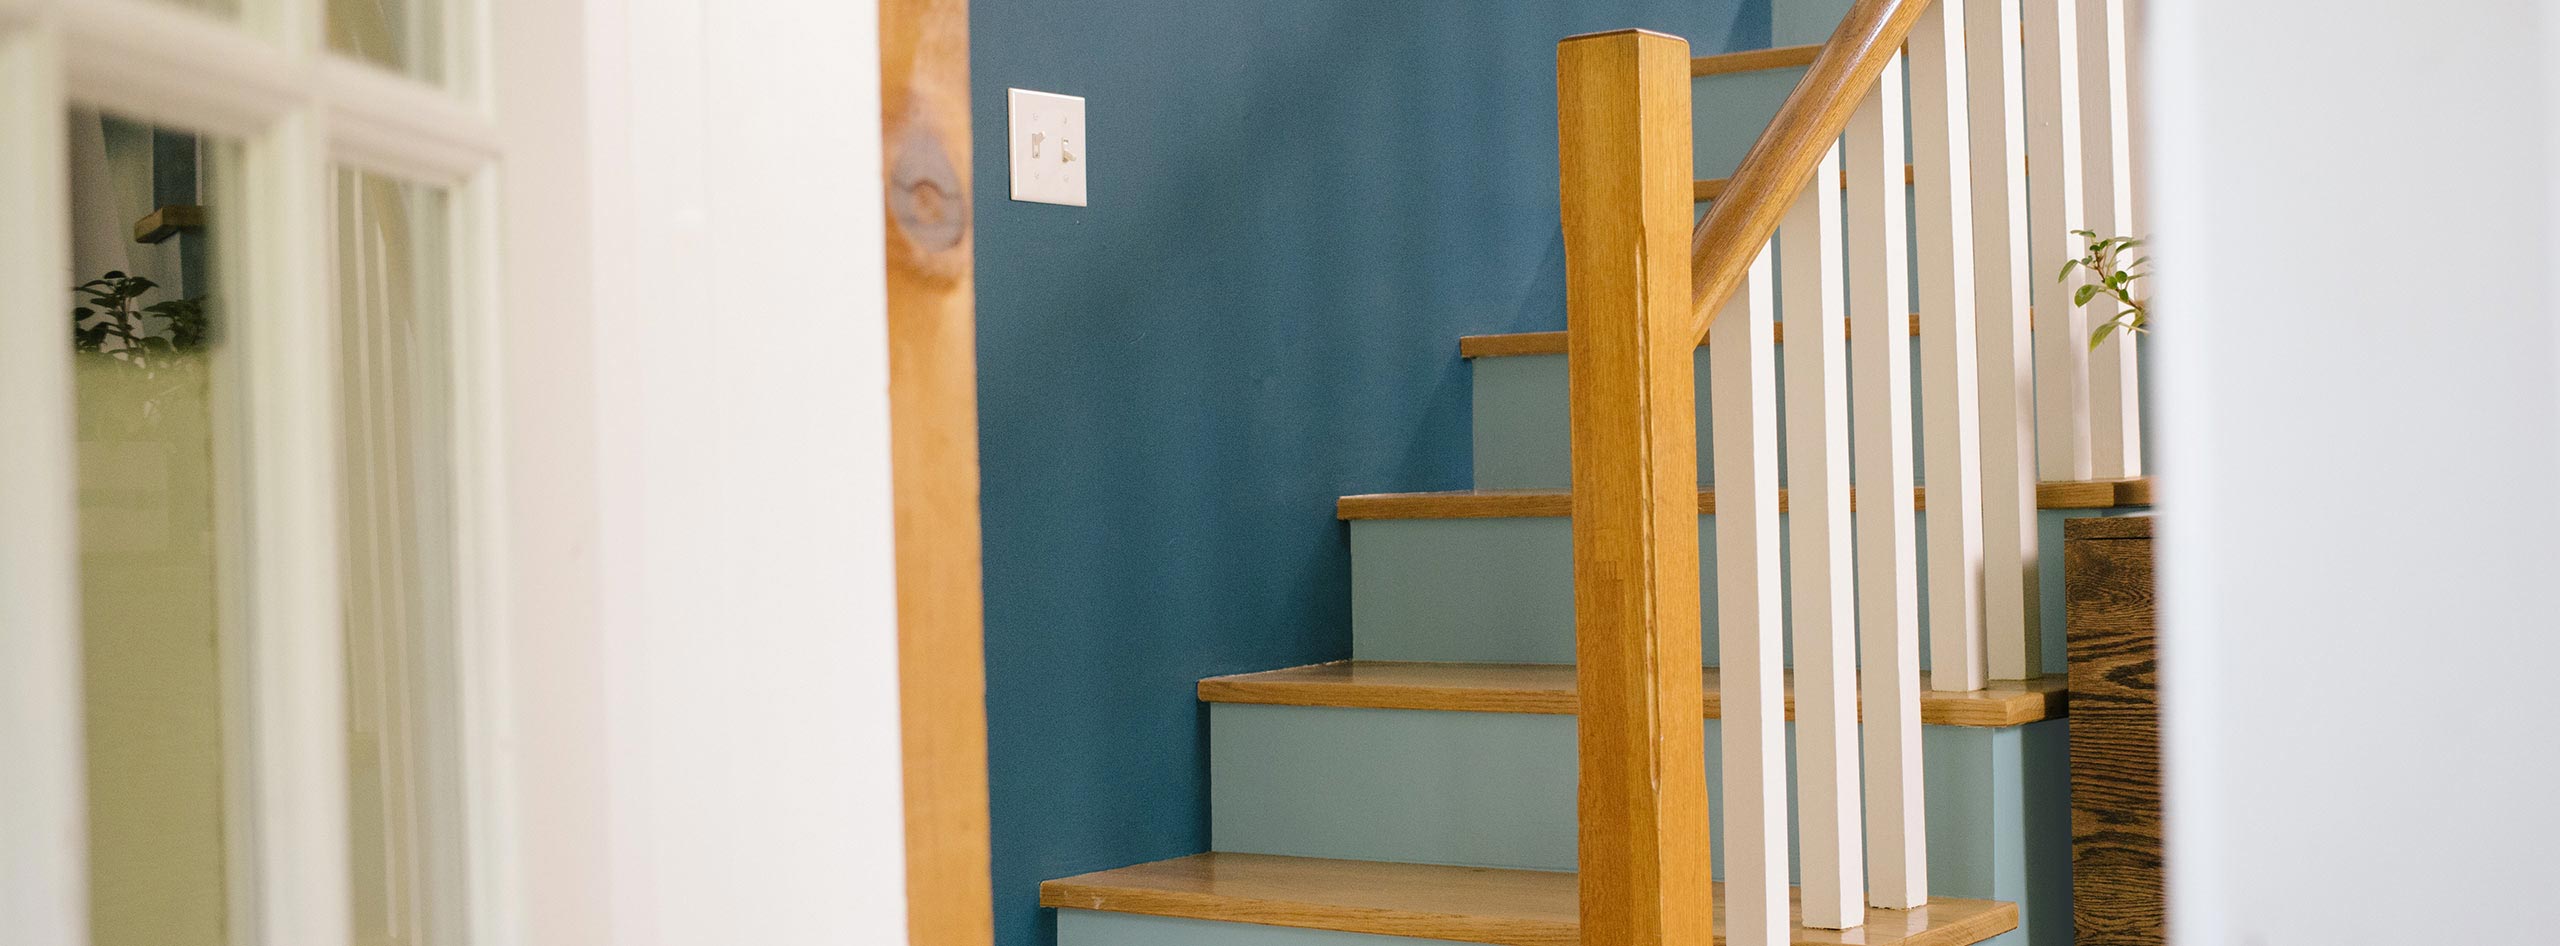 A staircase with blue wall, light blue risers, white balusters, and natural wooden treads and handrails.